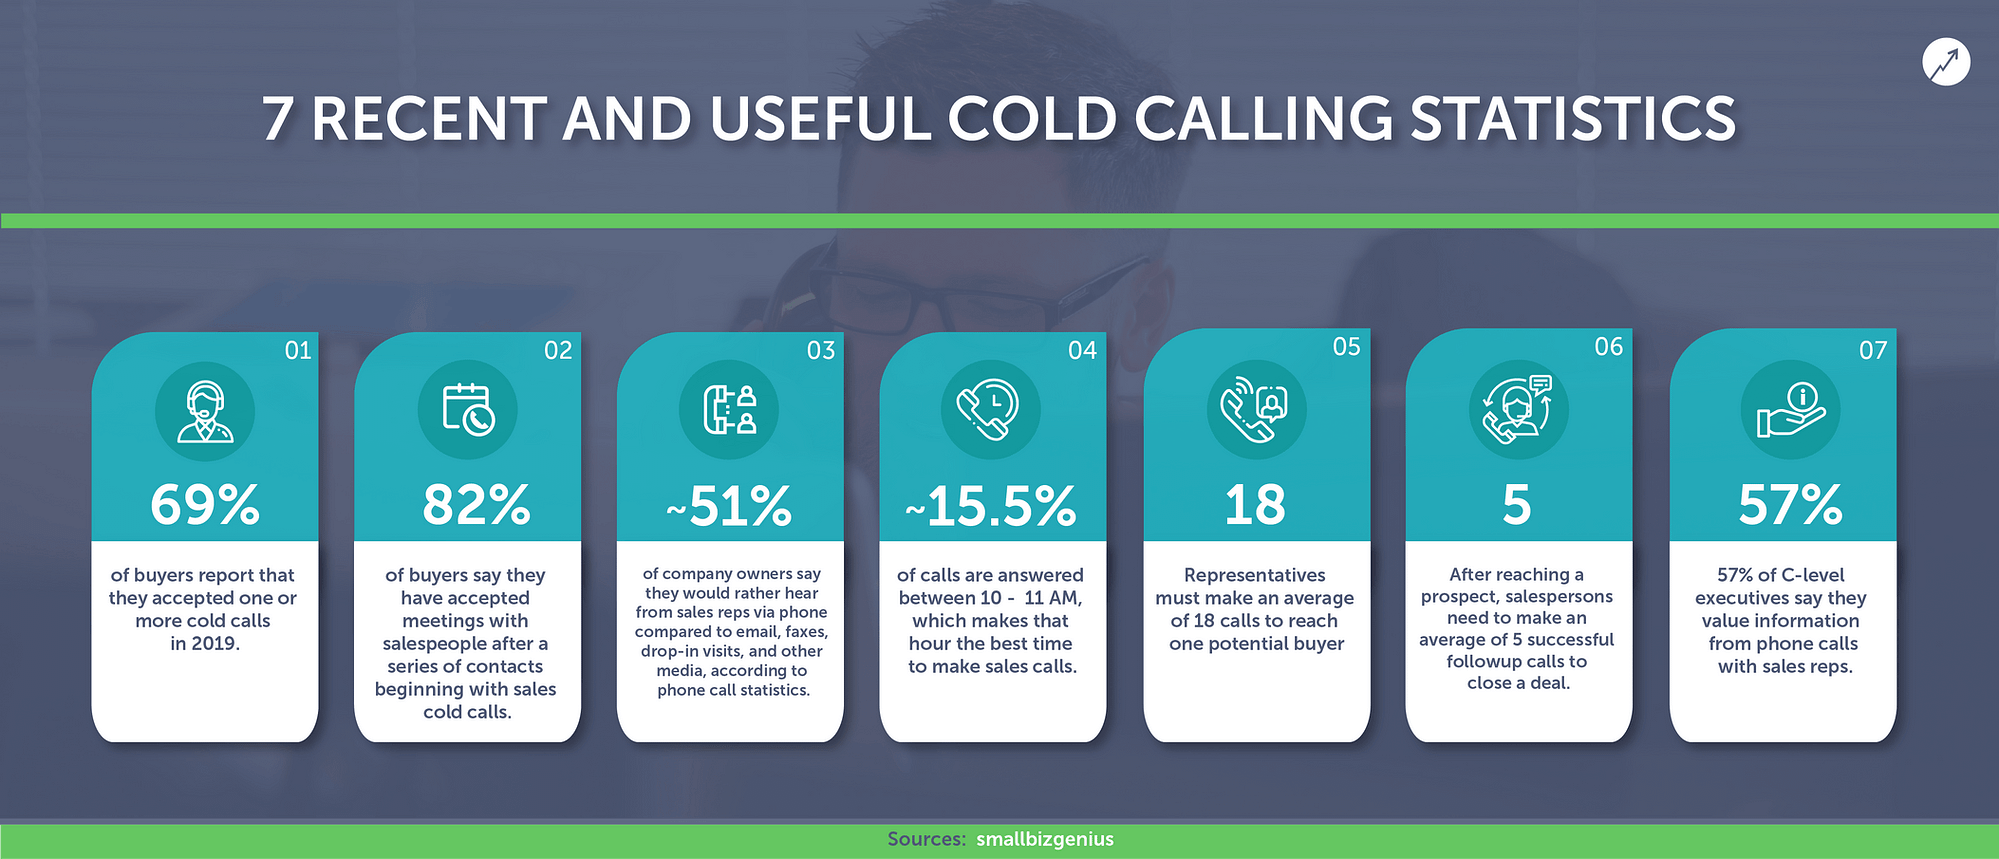 Does Cold Calling Work for B2B Businesses to Reach Prospects?